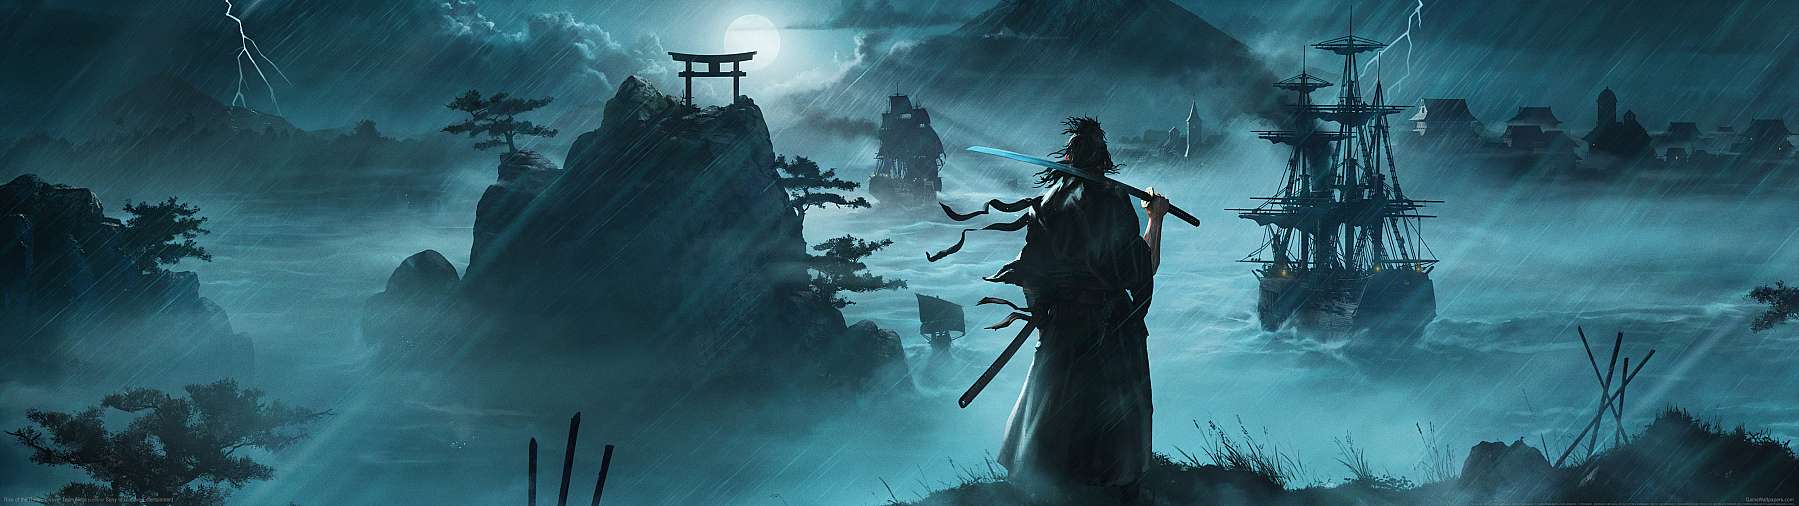 Rise of the Ronin superwide wallpaper or background 01